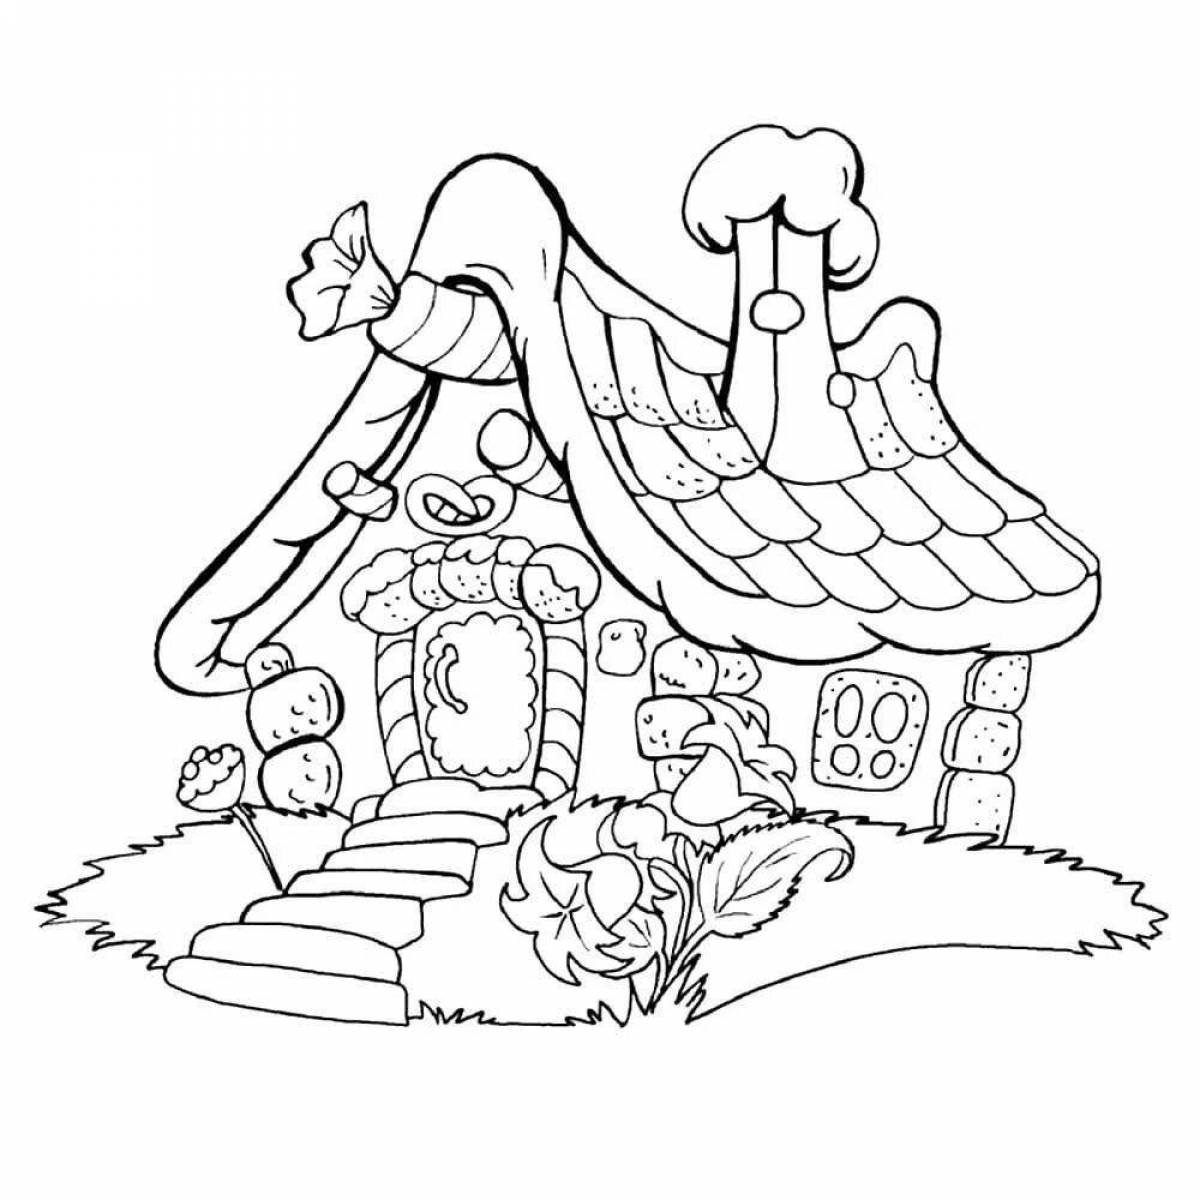 Refreshing fairy hut coloring book